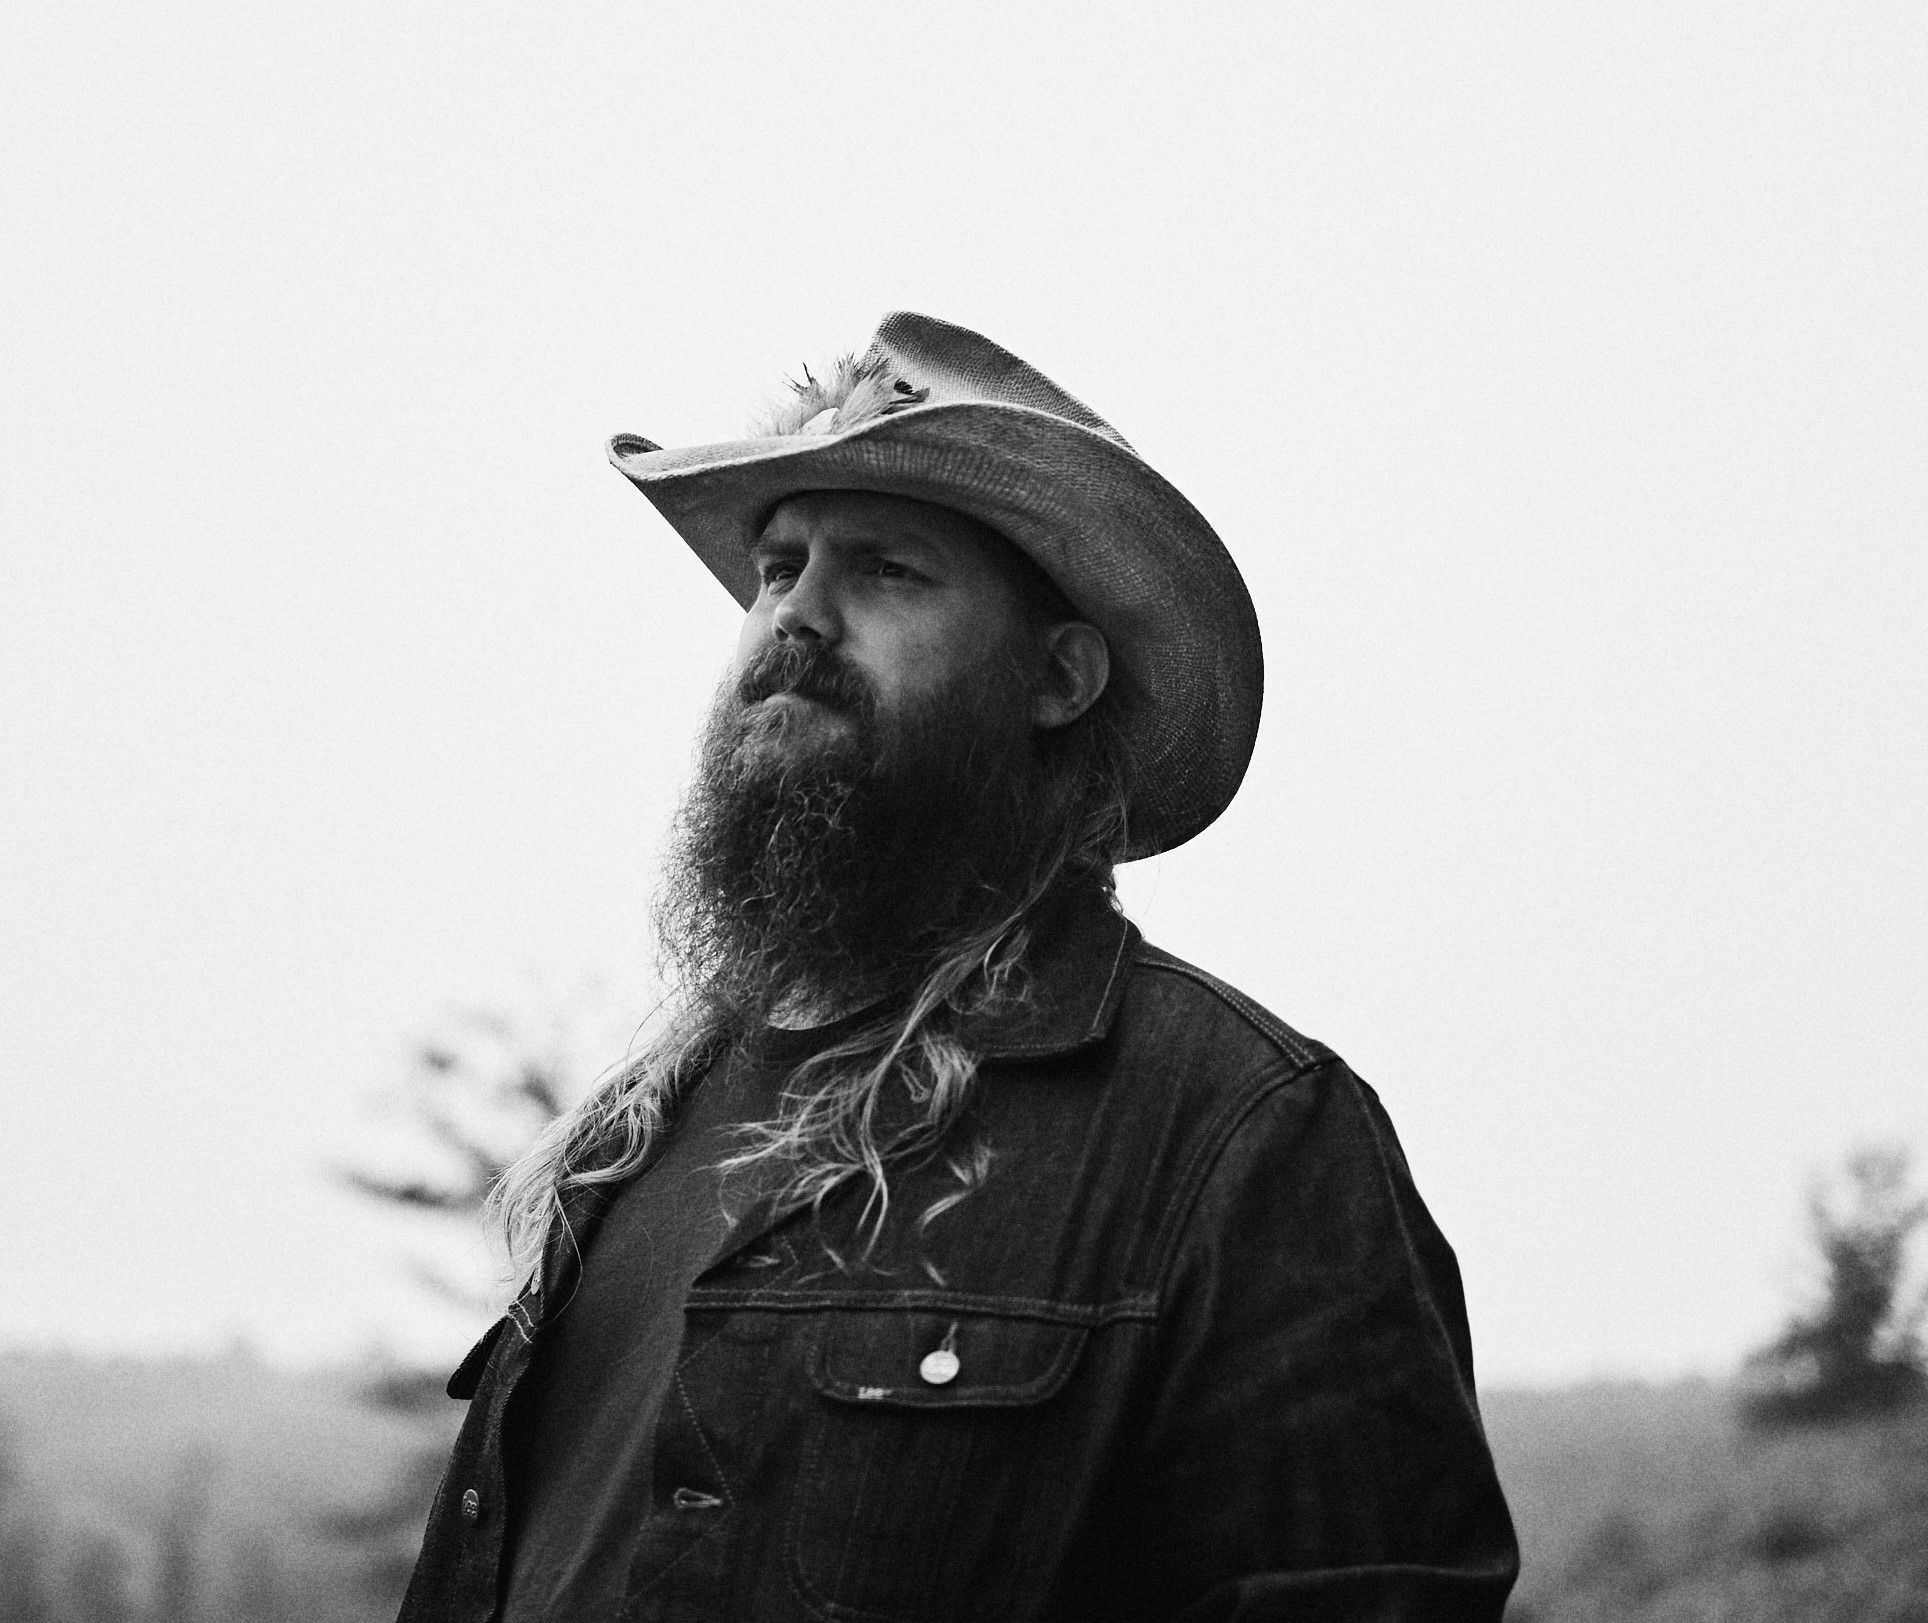 CHRIS STAPLETON’S STARTING OVER DEBUTS AT 1 ON BILLBOARD COUNTRY CHART